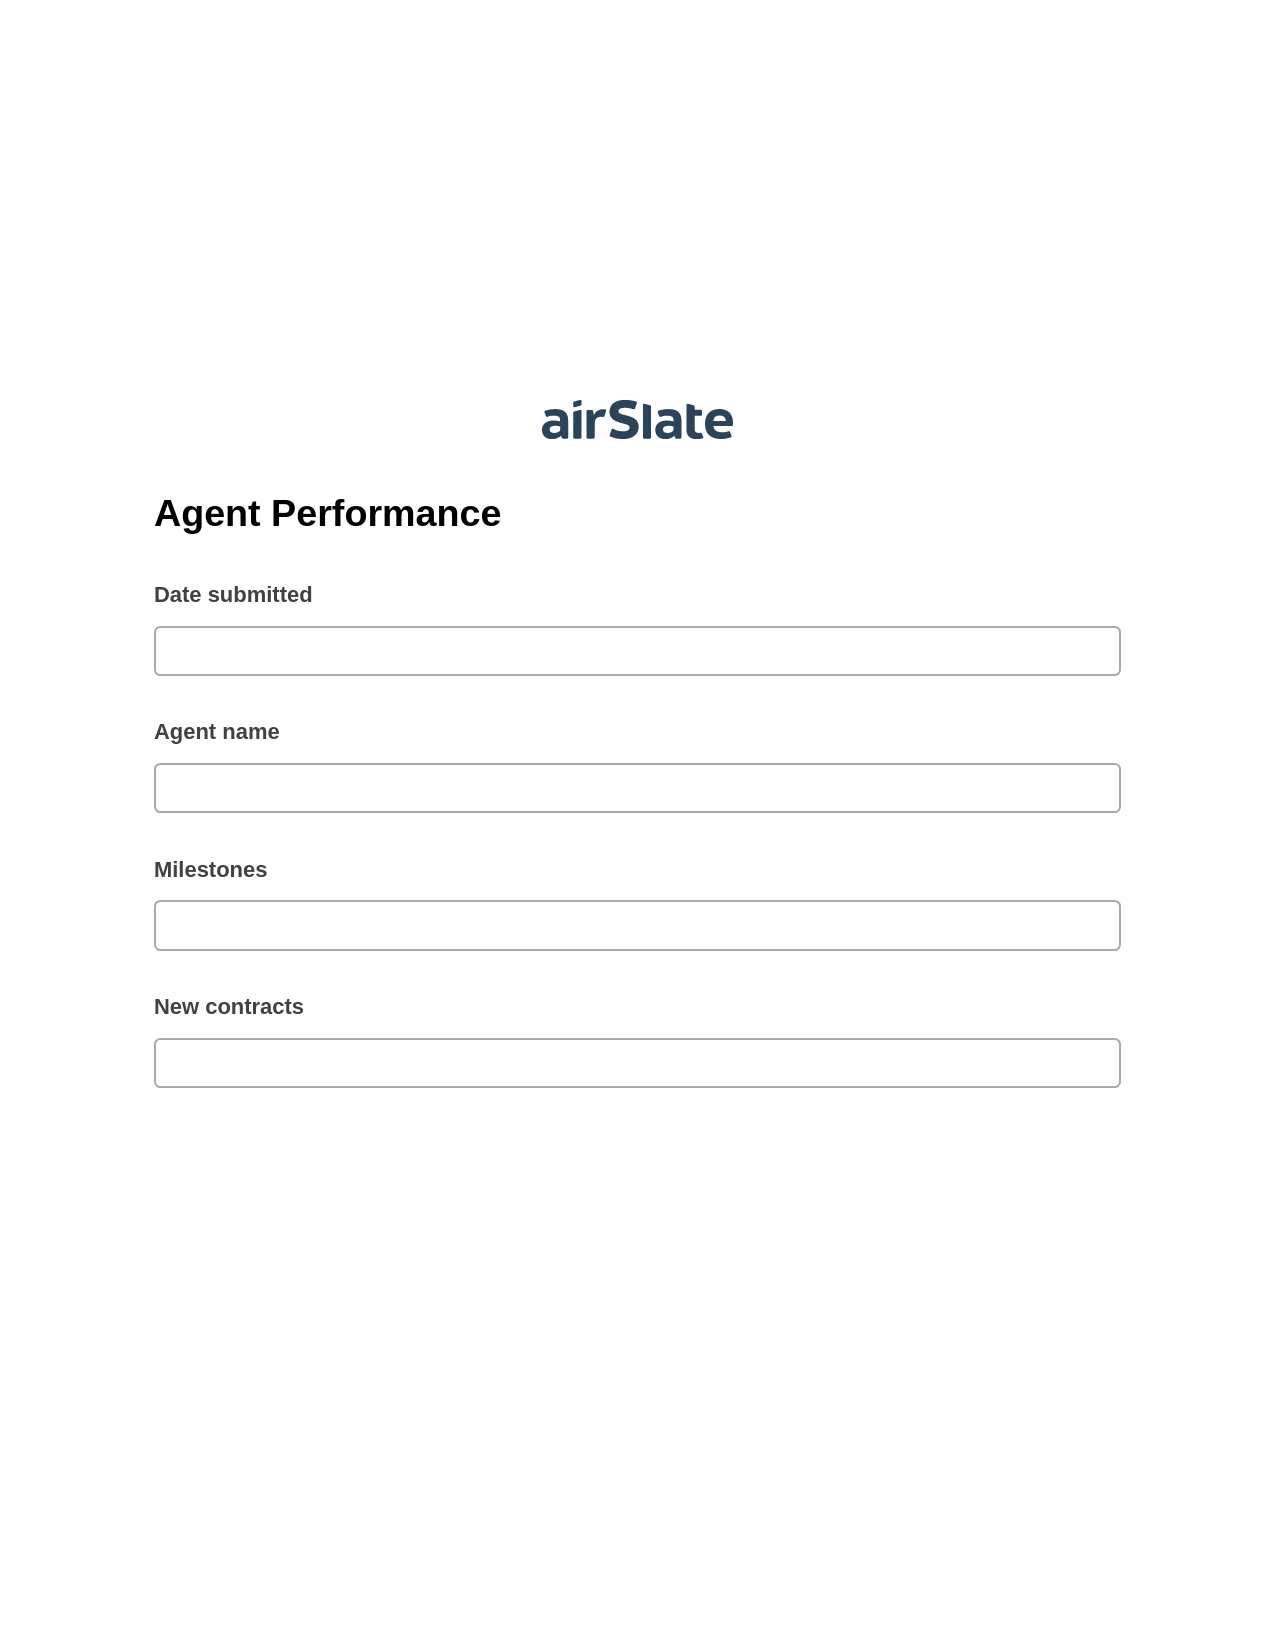 Agent Performance Pre-fill Dropdowns from Airtable, Update NetSuite Record Bot, Export to Smartsheet